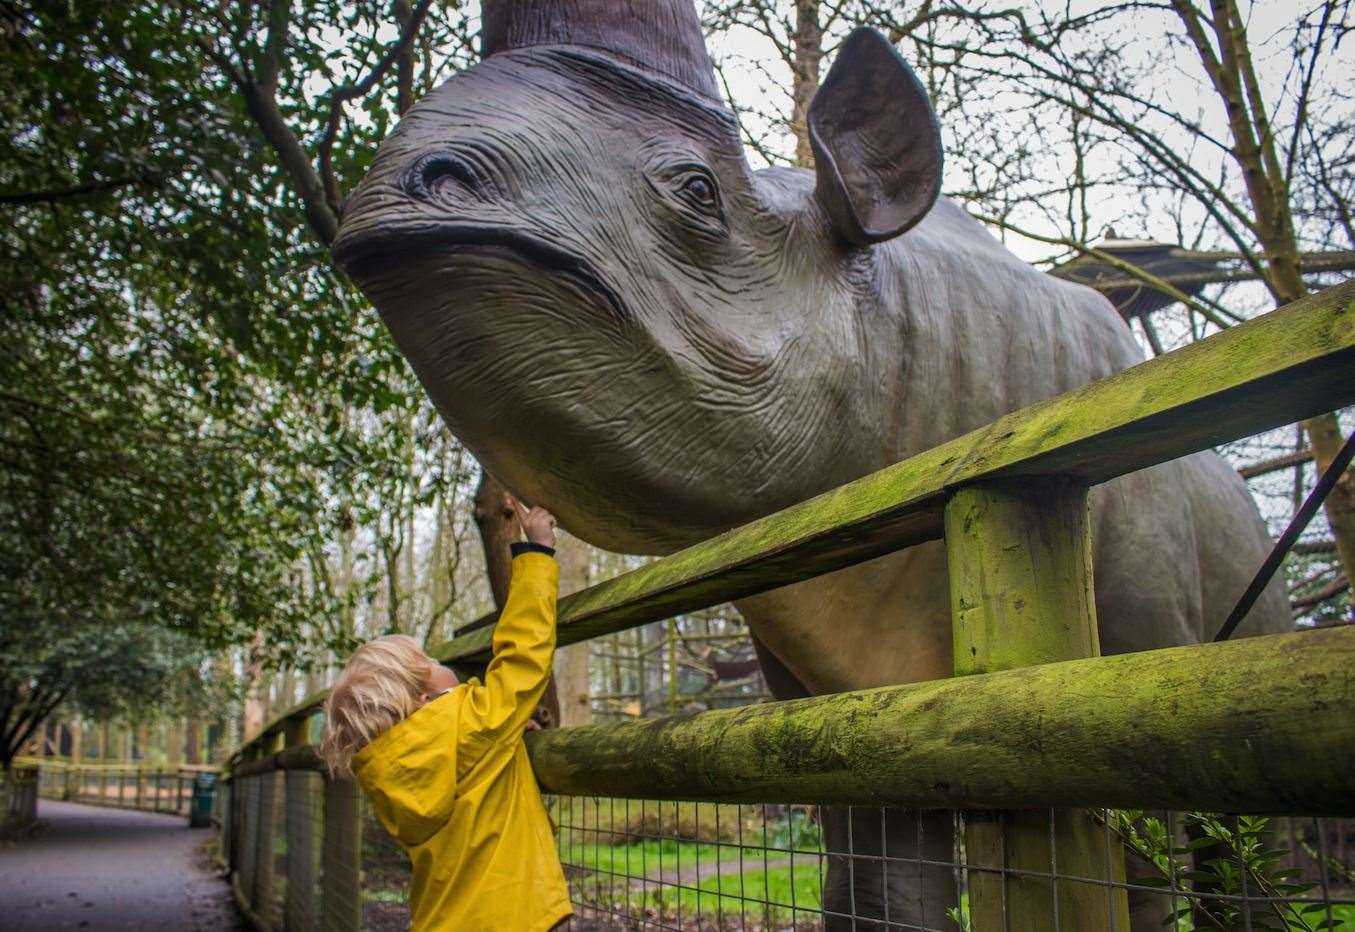 Howletts is among those taking part in Kent Big Weekend